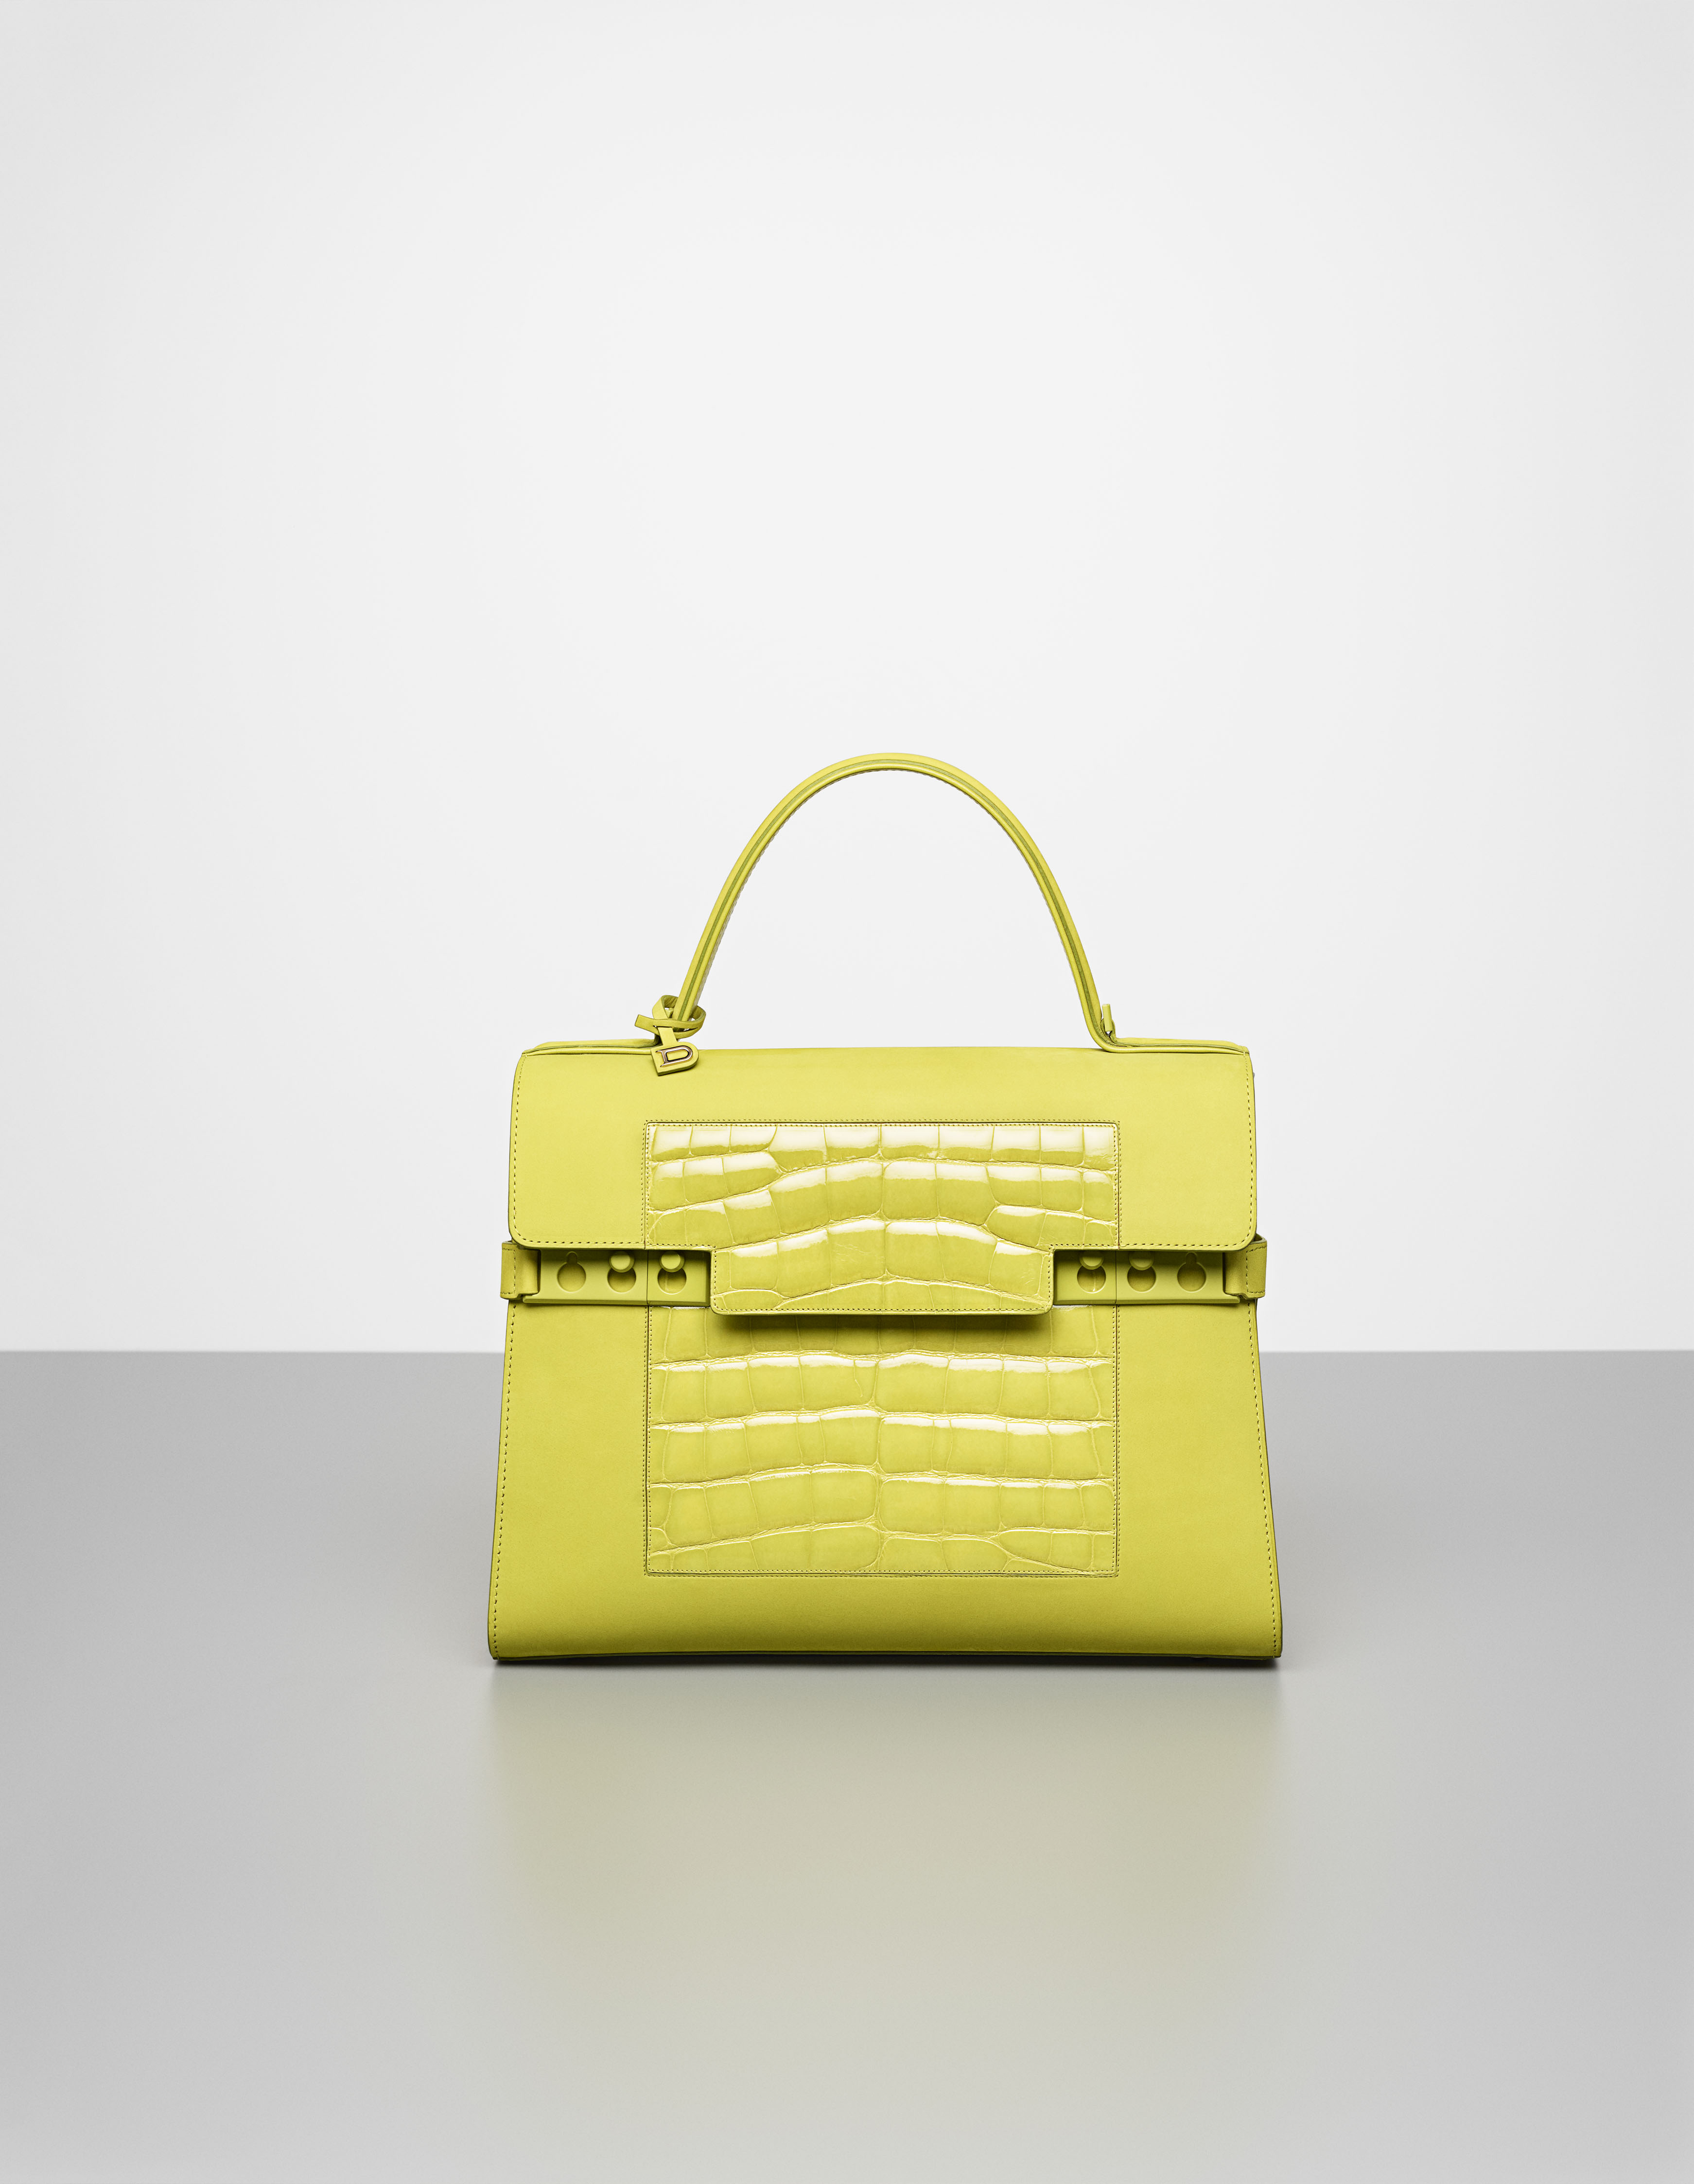 Delvaux: Delvaux's The Hide and Seek Autumn-Winter 2020 Collection